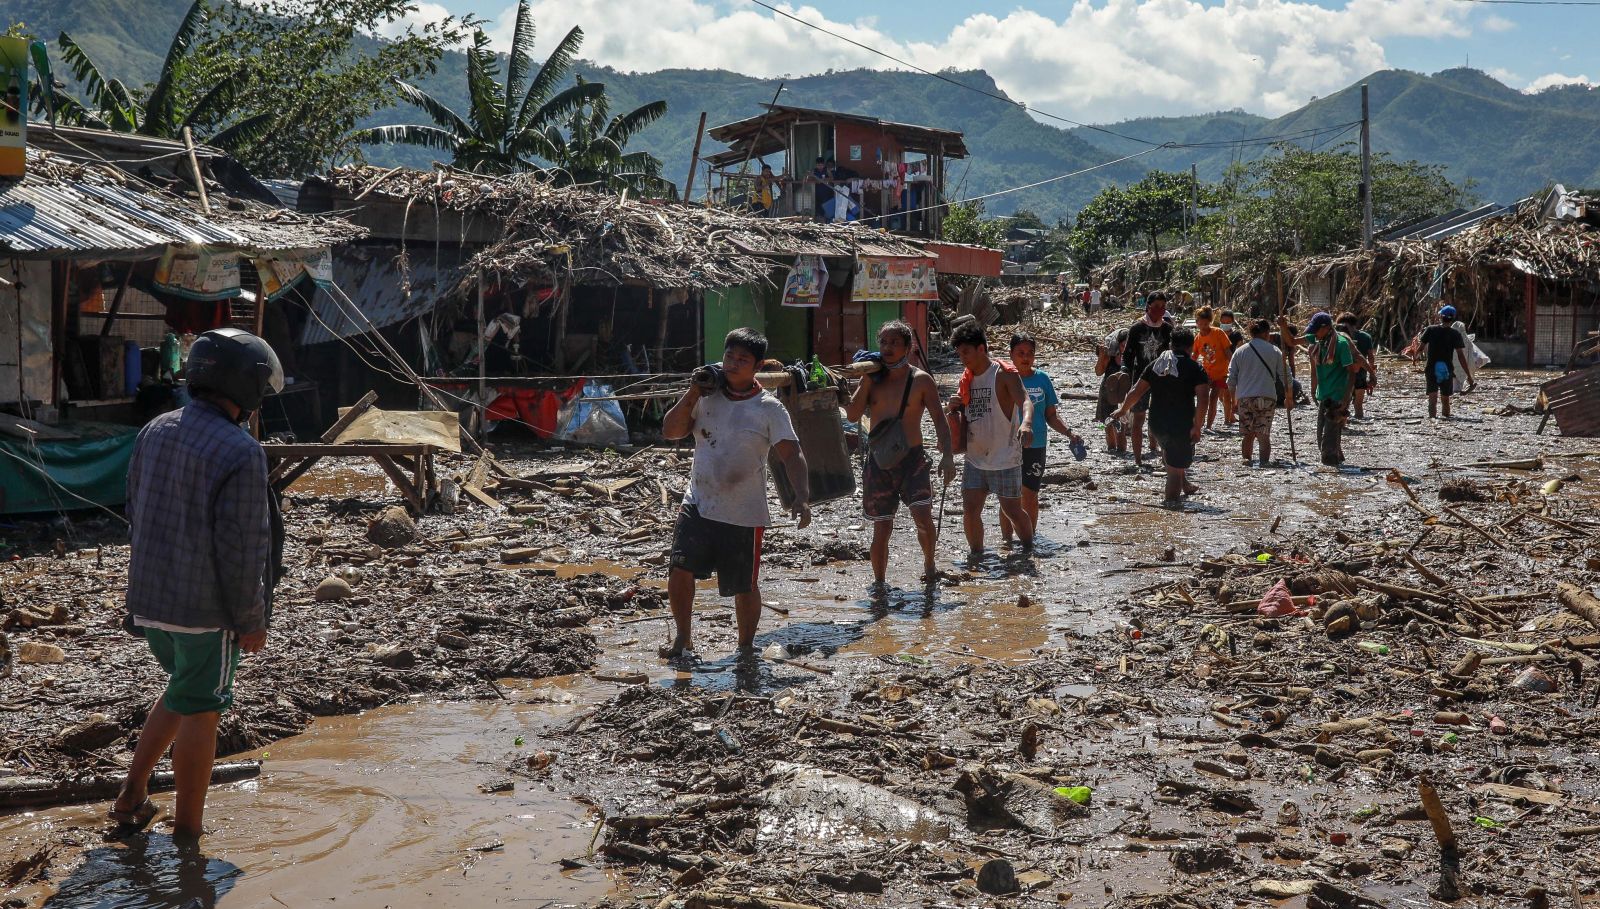 epa08816993 Residents carry salvaged belongings along a road covered in mud and debris in the aftermath of Typhoon Vamco in Rodriguez, Rizal, east of Manila, Philippines, 13 November 2020. According to reports the death toll rose to at least 26 as Typhoon Vamco caused floods in Metro Manila, neighboring provinces and parts of the Bicol region after making landfall in the southern Luzon region.  EPA/MARK R. CRISTINO